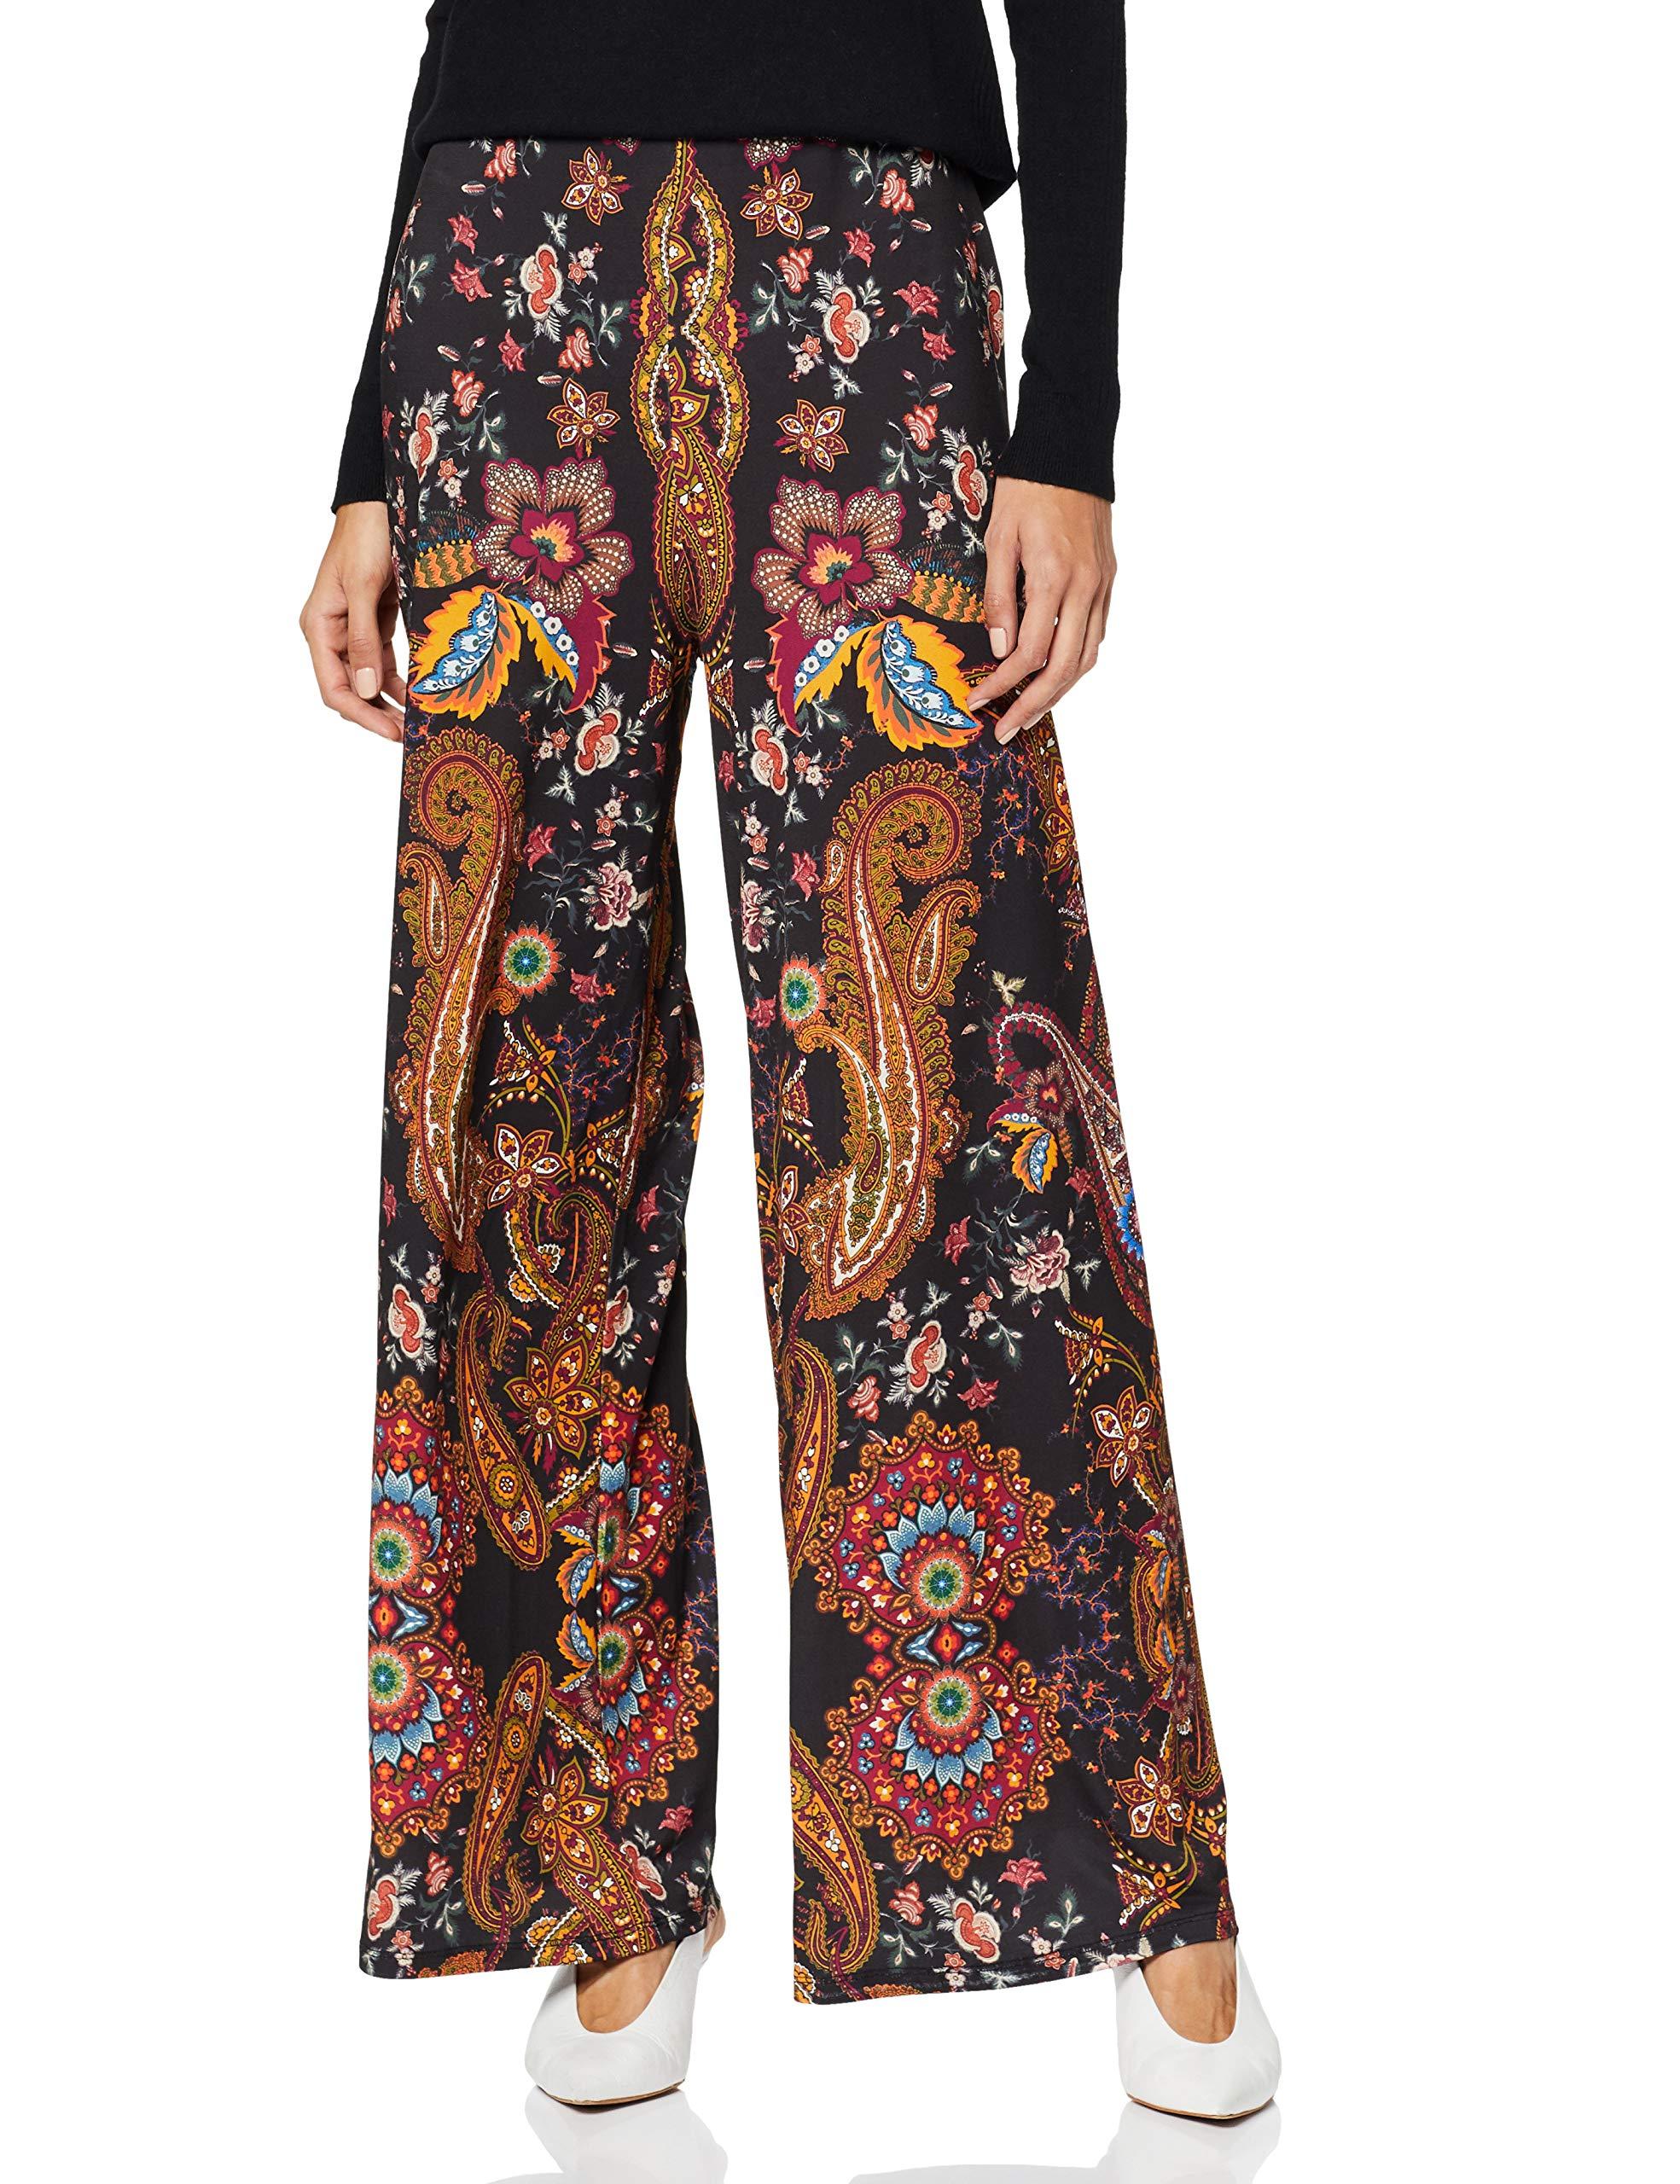 Desigual Synthetic Trousers Indira - Lyst